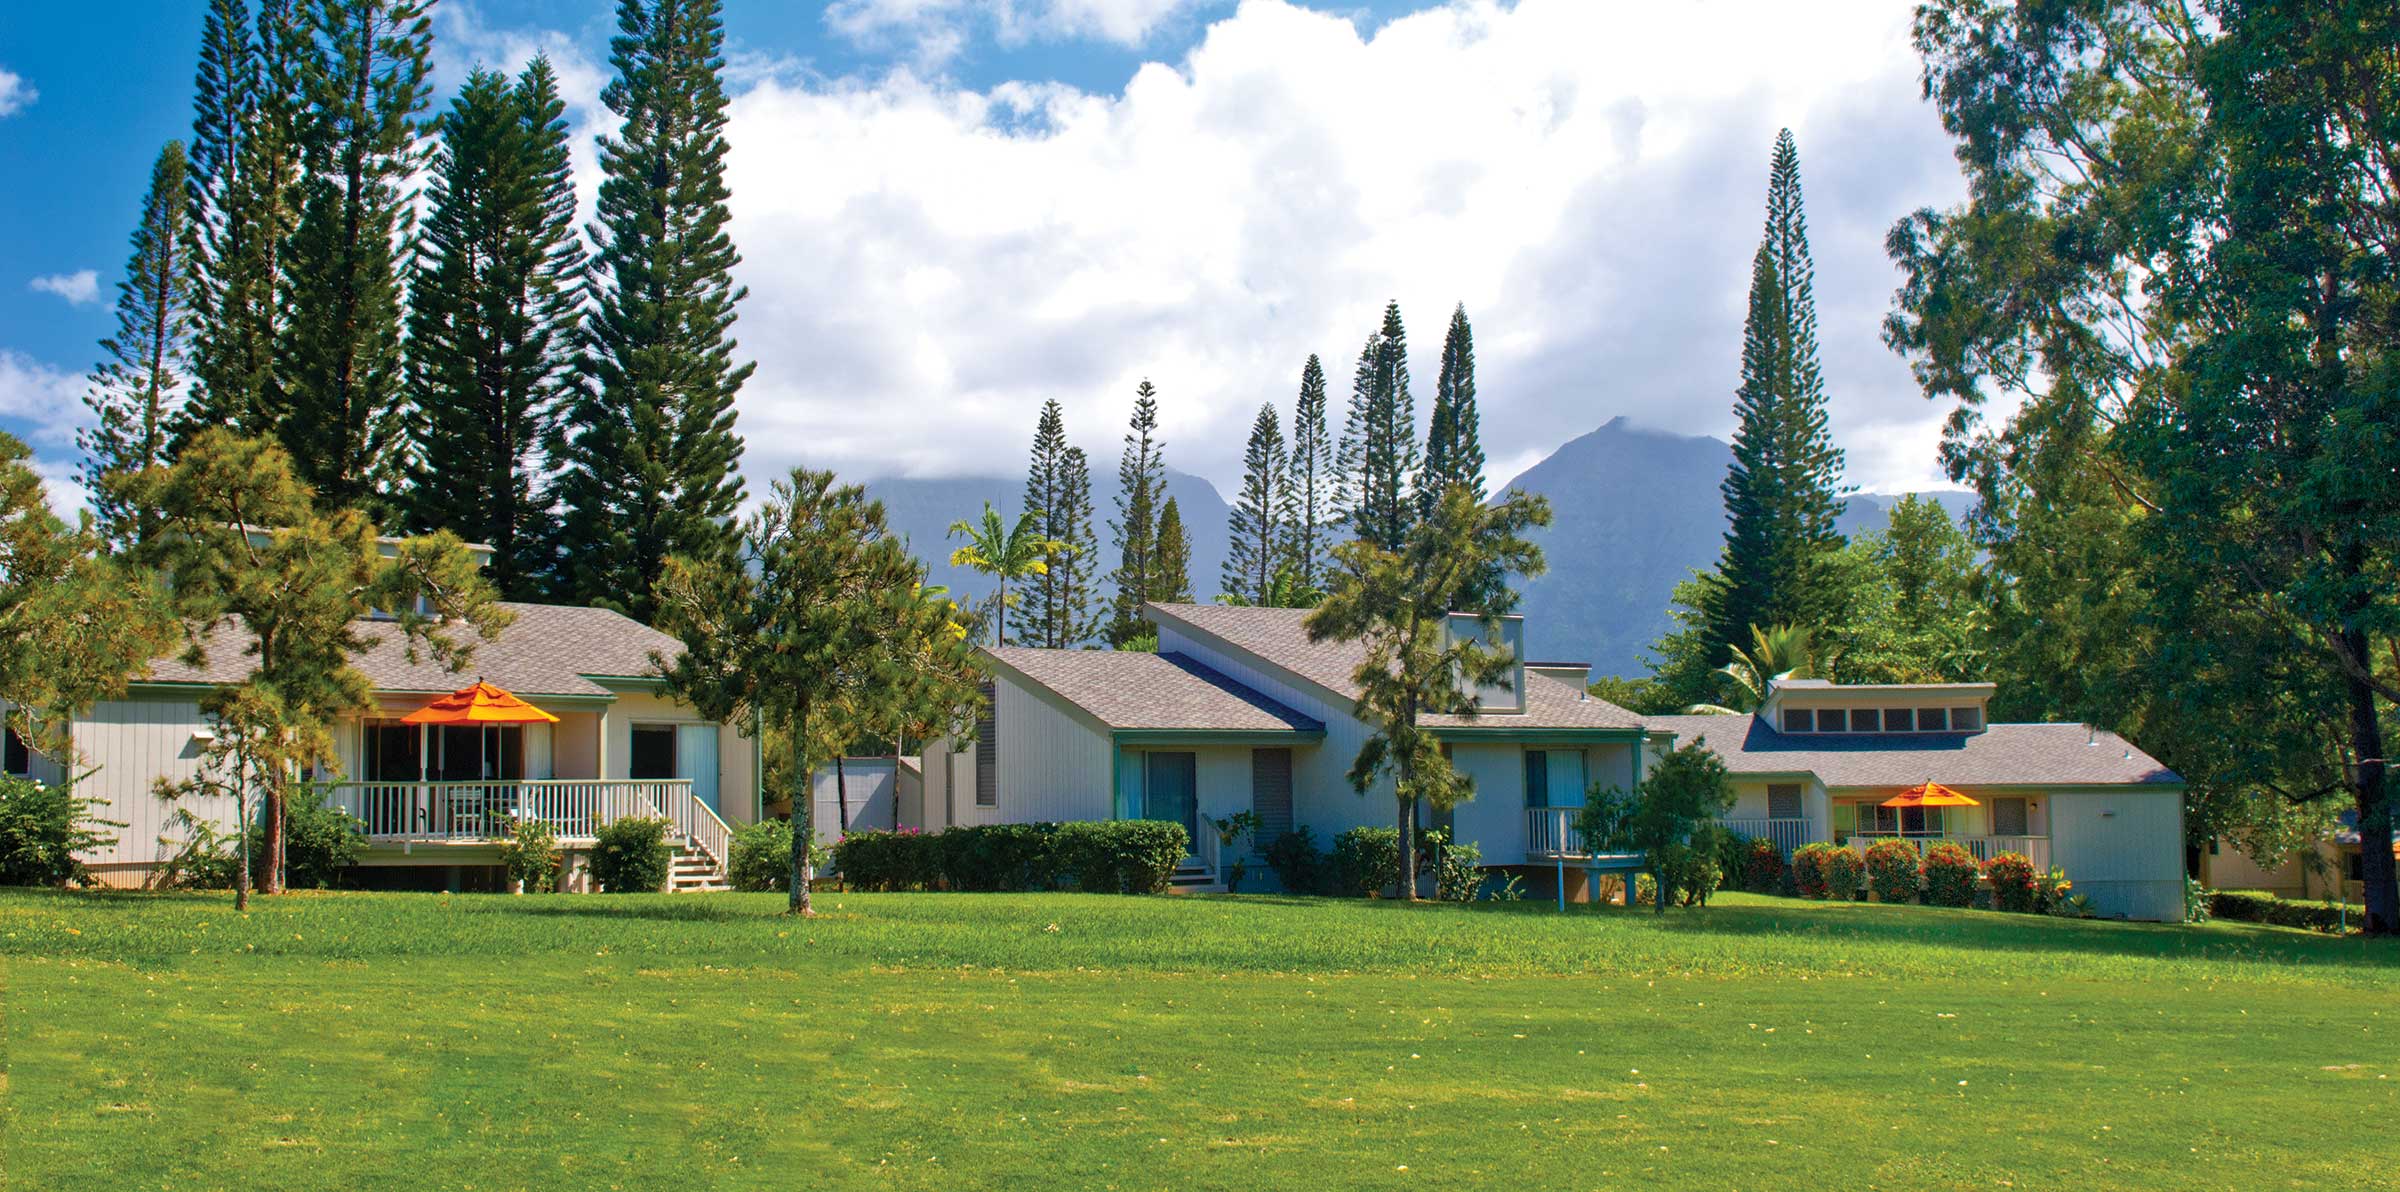 Buy Wyndham Makai Club Cottages Timeshares For Sale Sell Wyndham